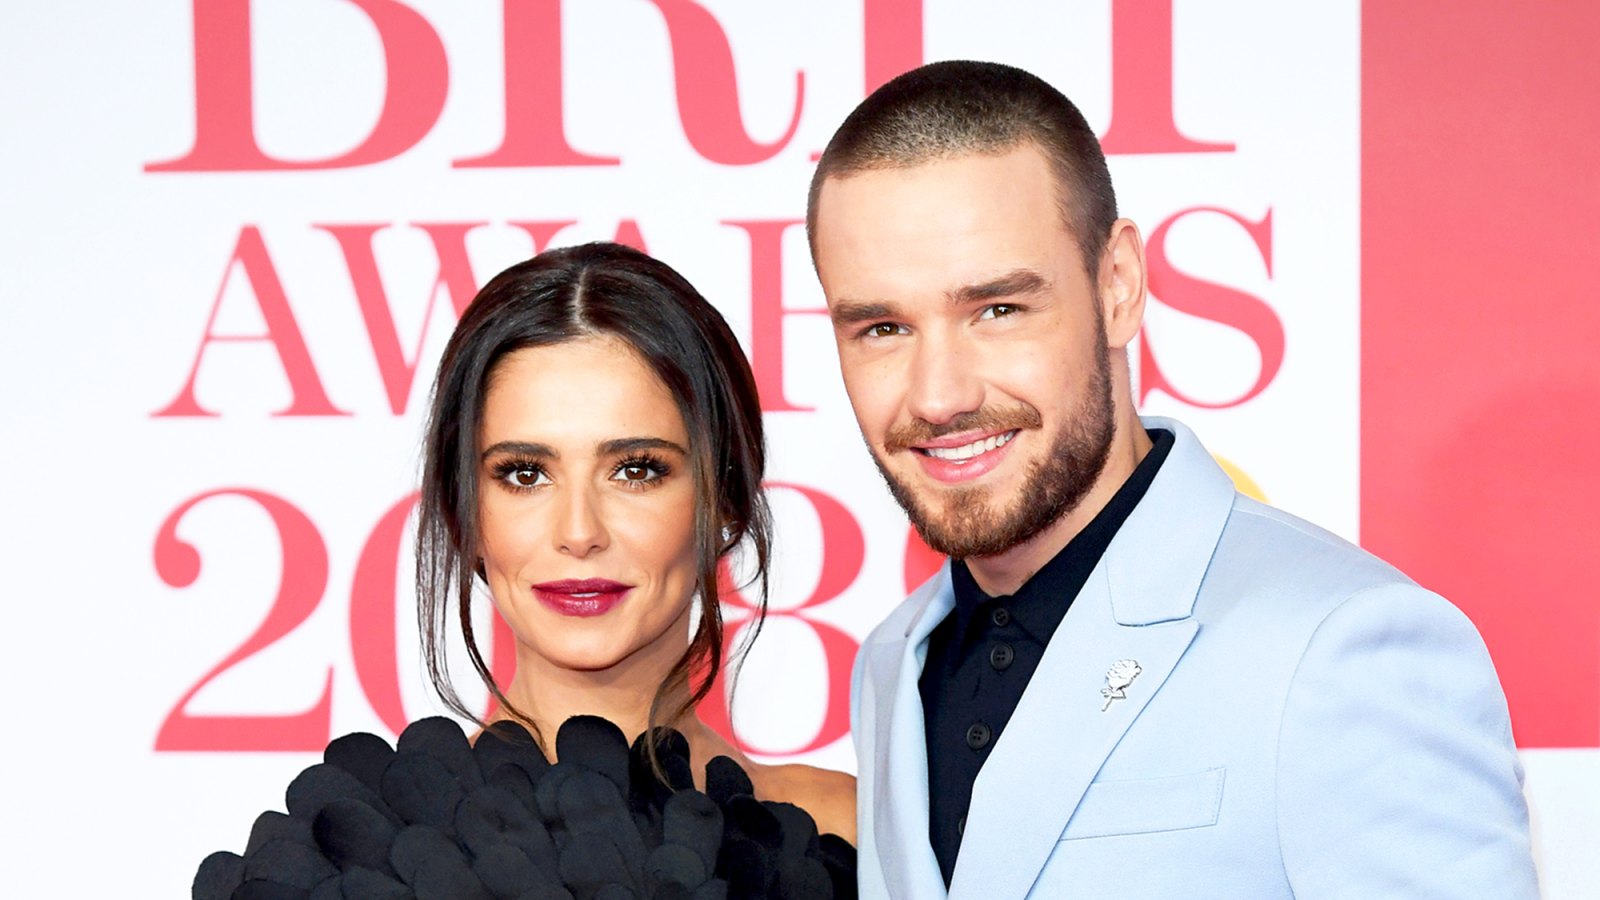 Cheryl Cole and Liam Payne attend The BRIT Awards 2018 held at The O2 Arena in London, England.